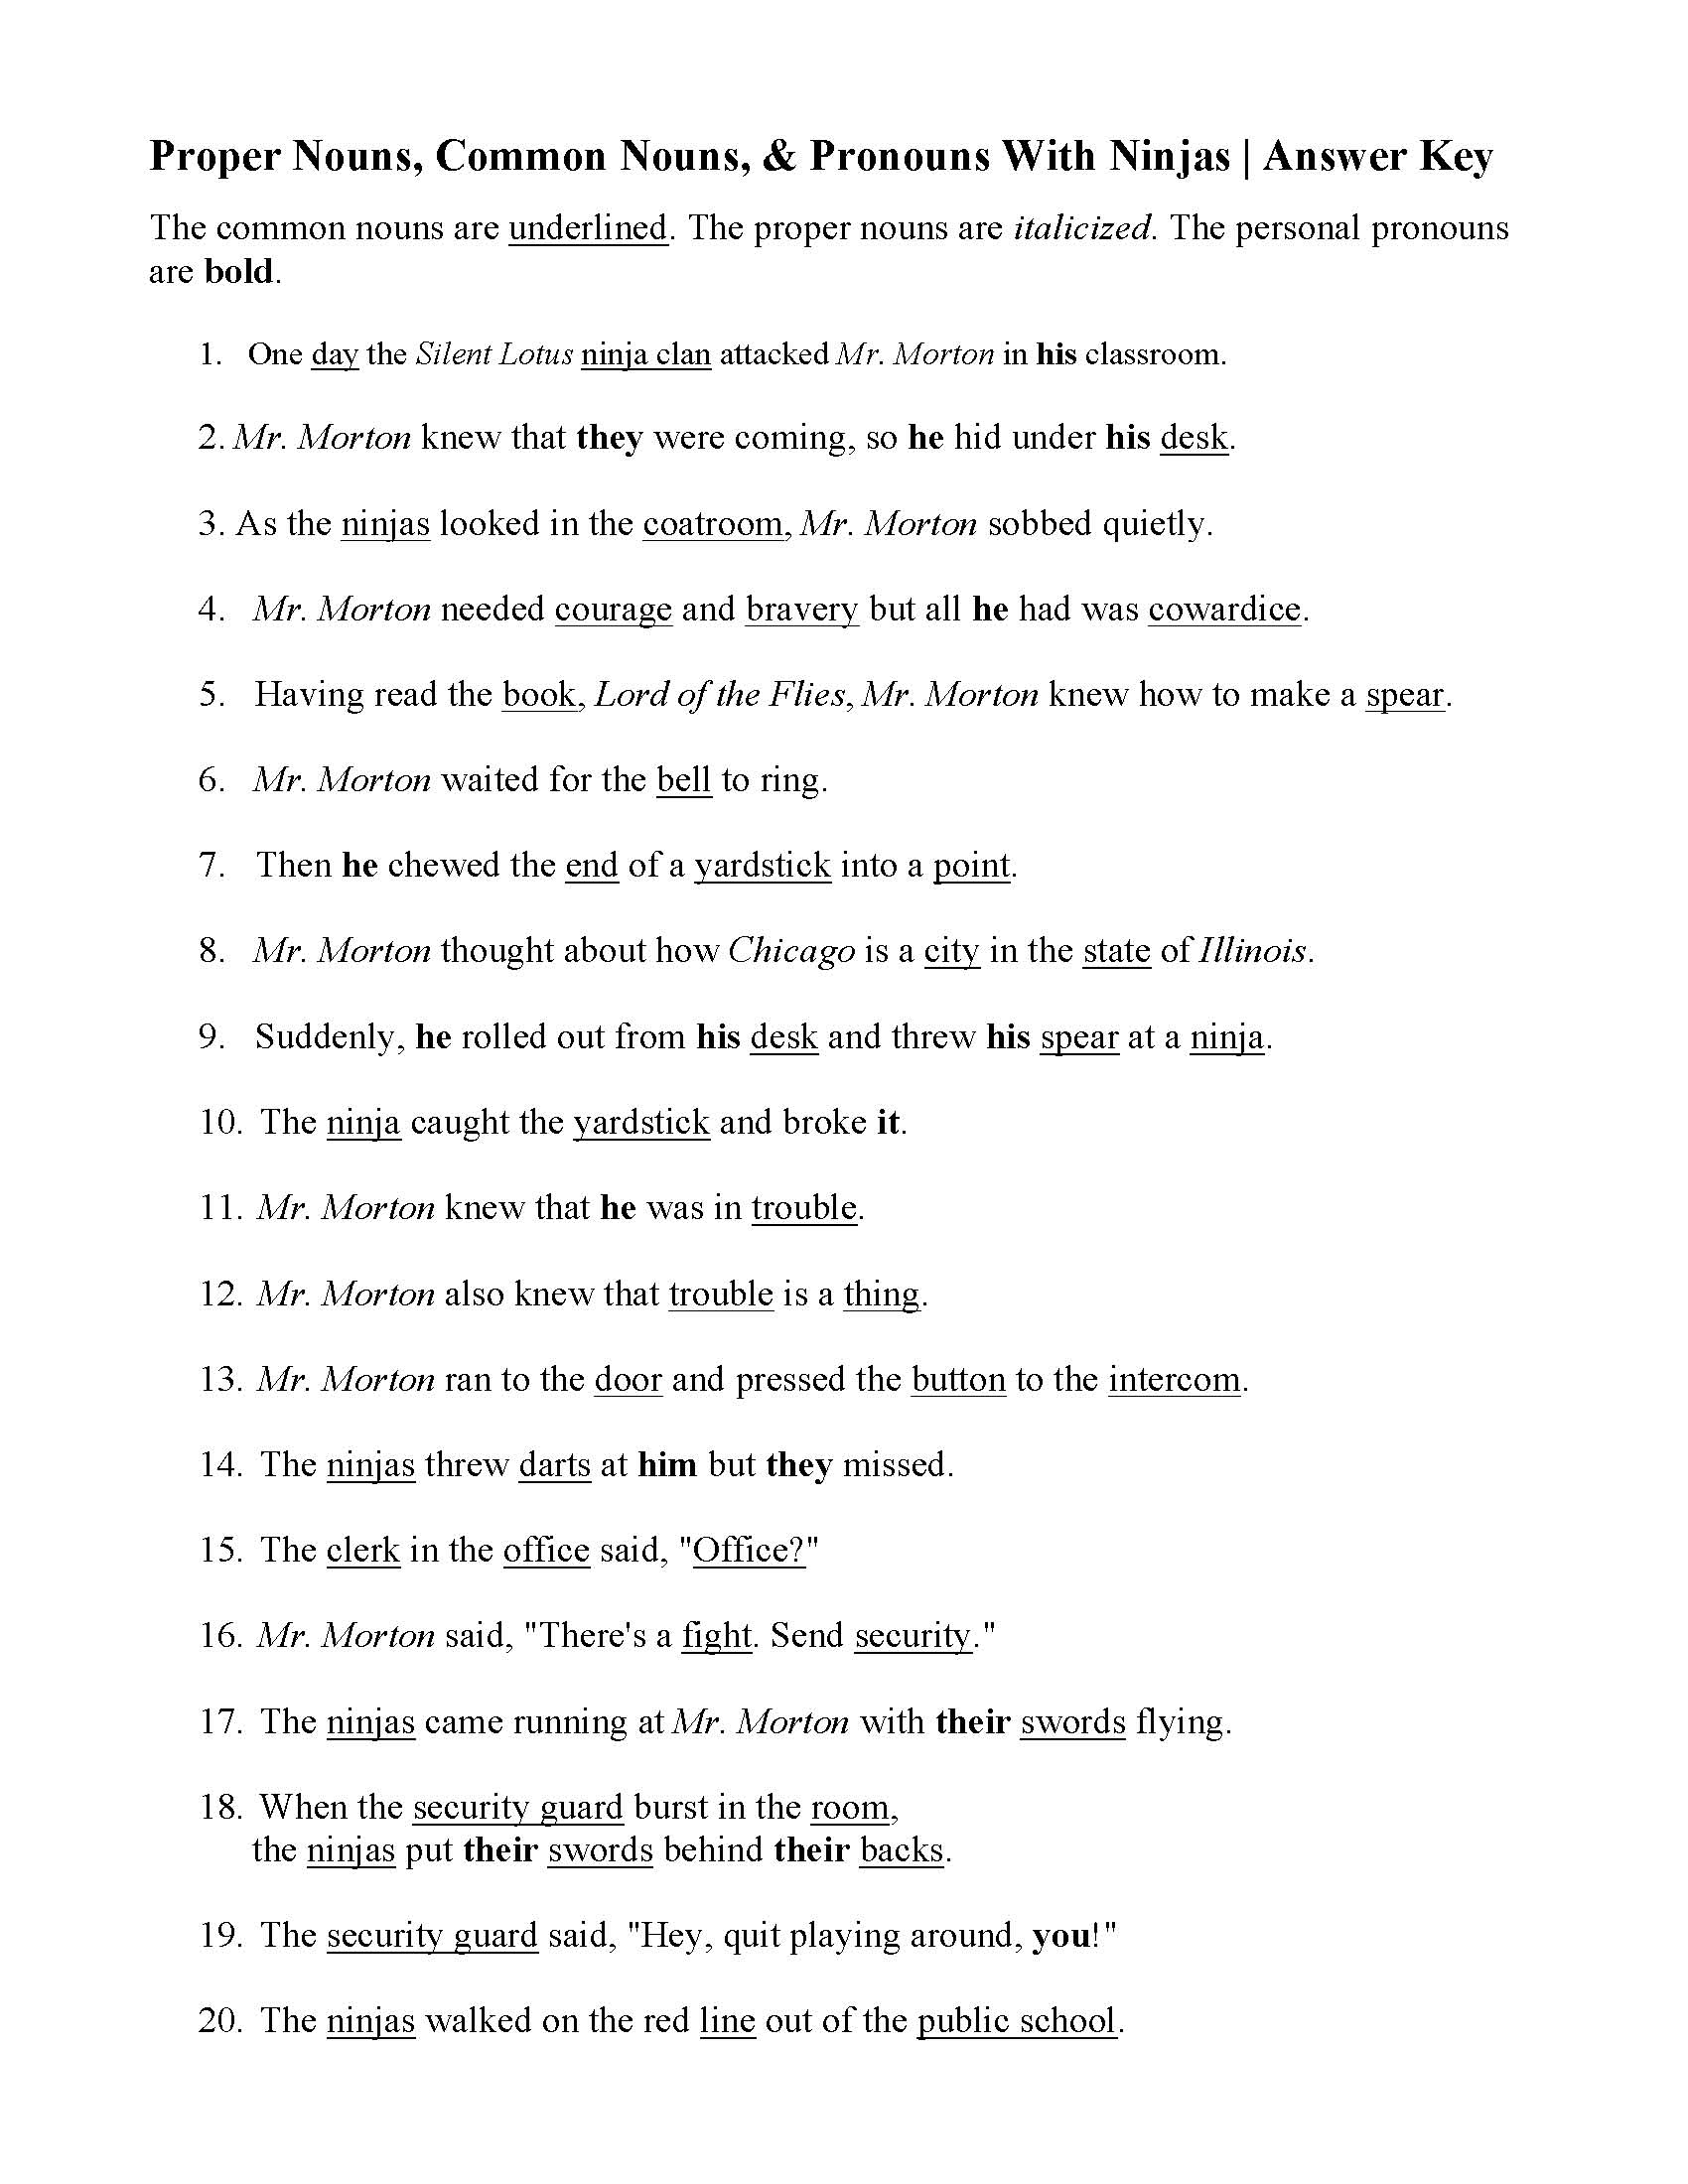 This is a preview image of Proper Nouns, Common Nouns, and Pronouns Worksheet | "With Ninjas". Click on it to enlarge it or view the source file.